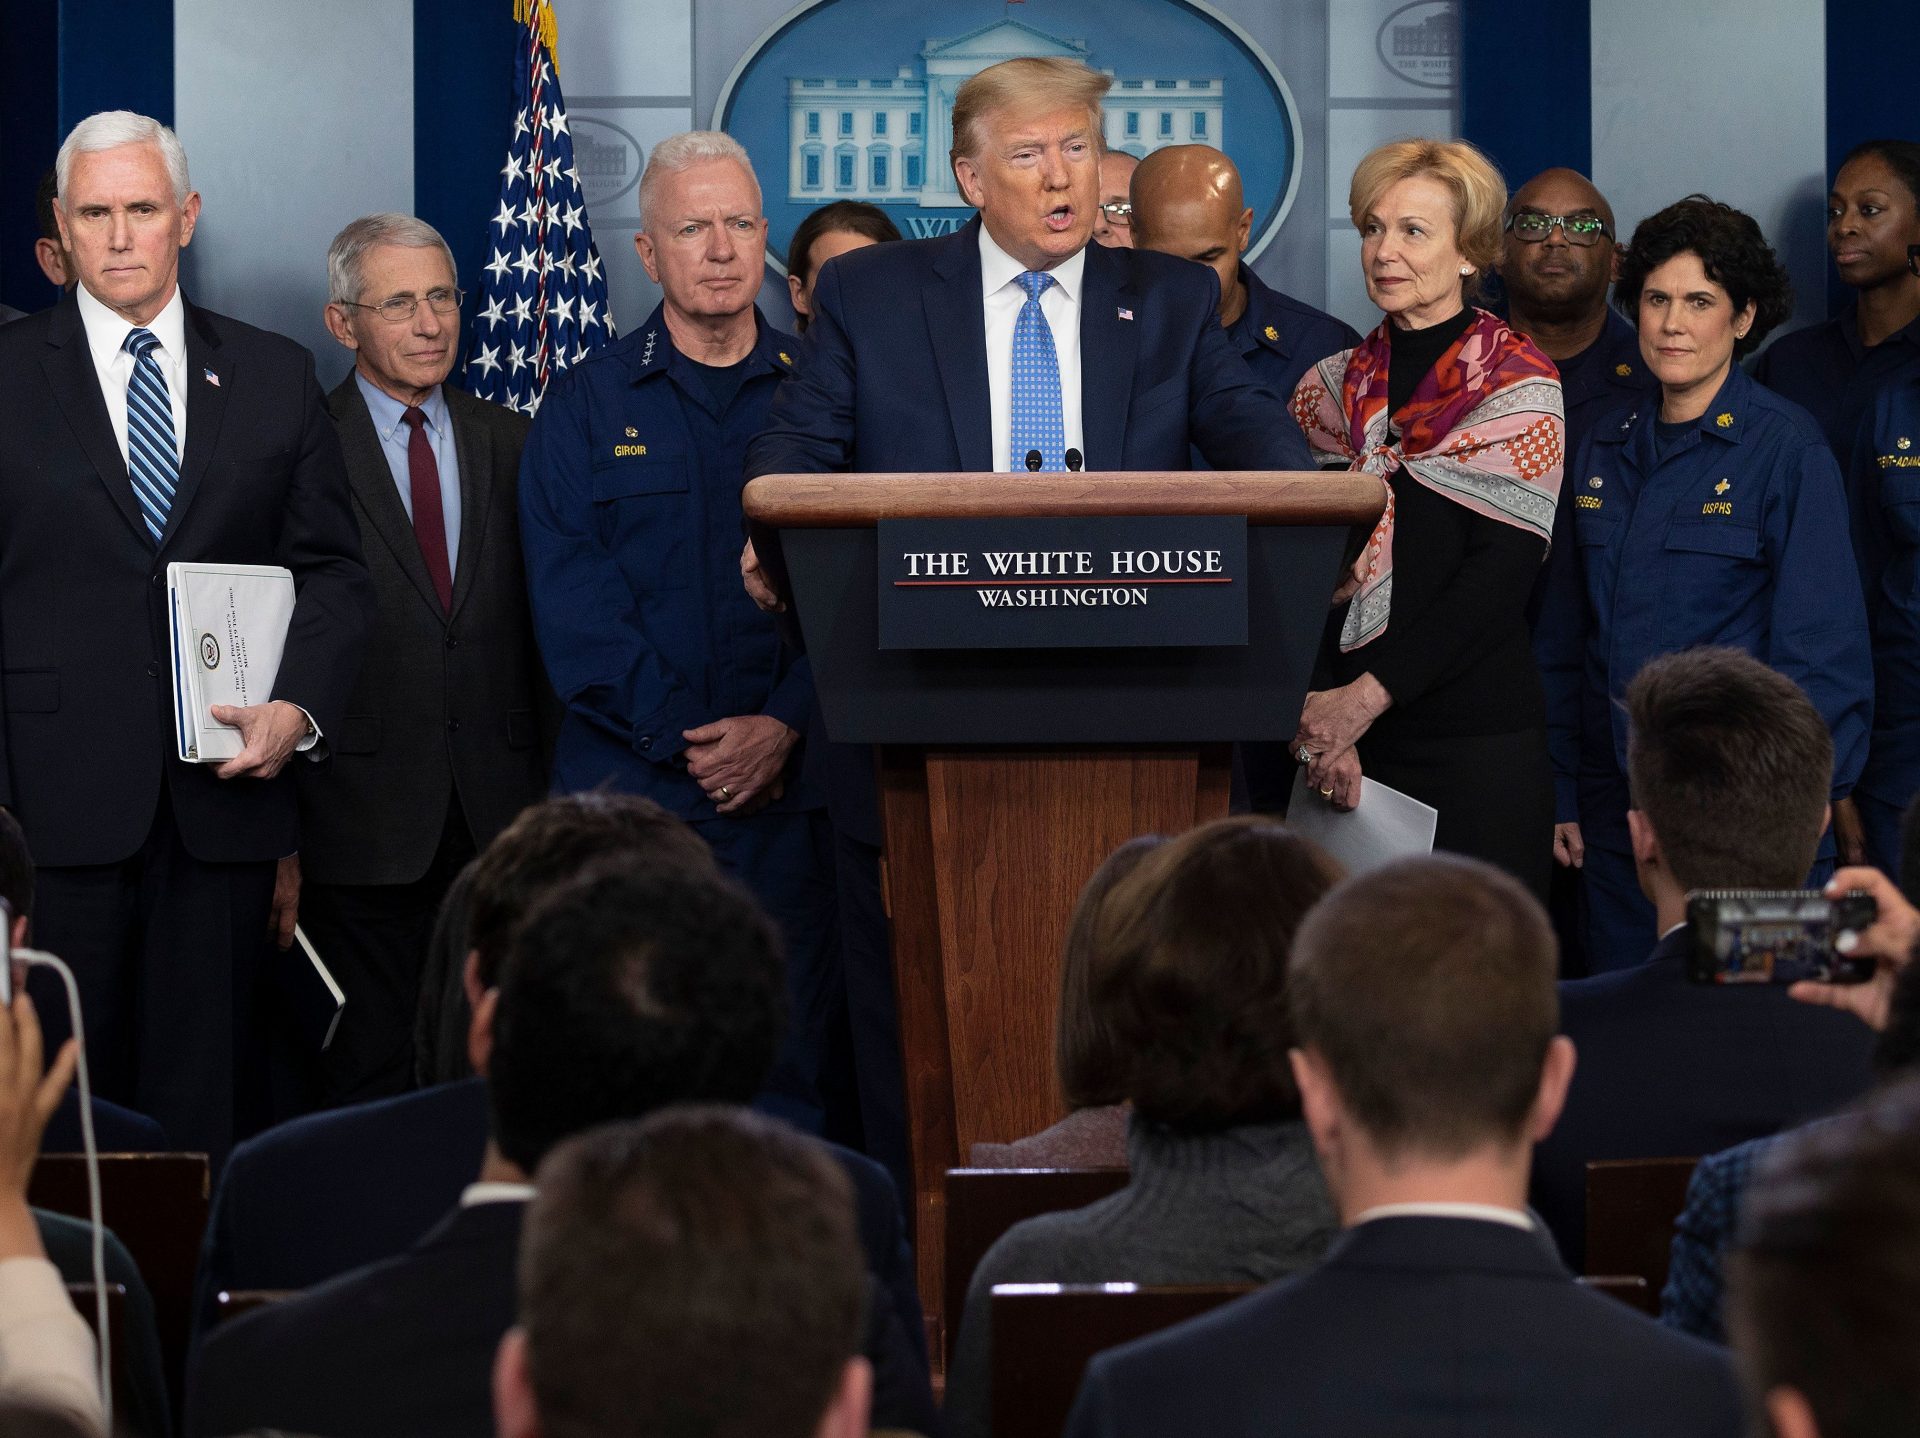 President Trump speaks during a press briefing about the coronavirus alongside Vice President Pence and members of the Coronavirus Task Force at the White House on March 15, 2020.